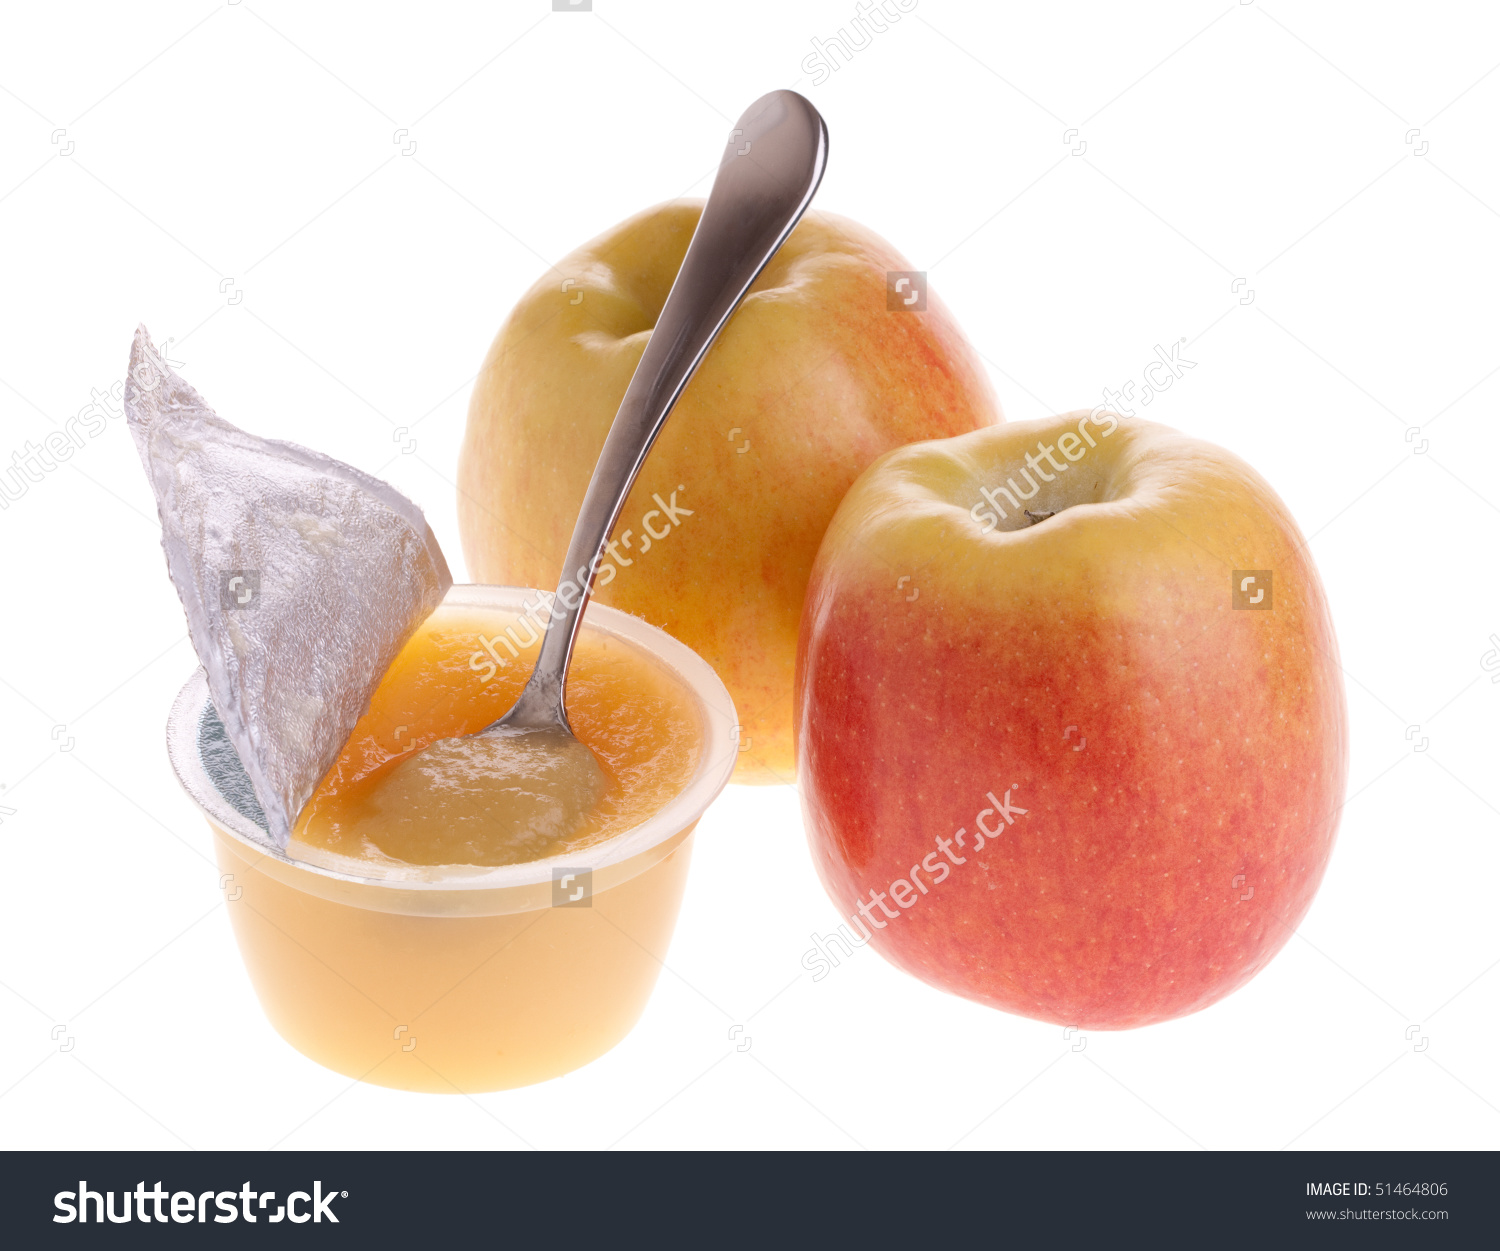 Save to a lightbox - Applesauce Clipart